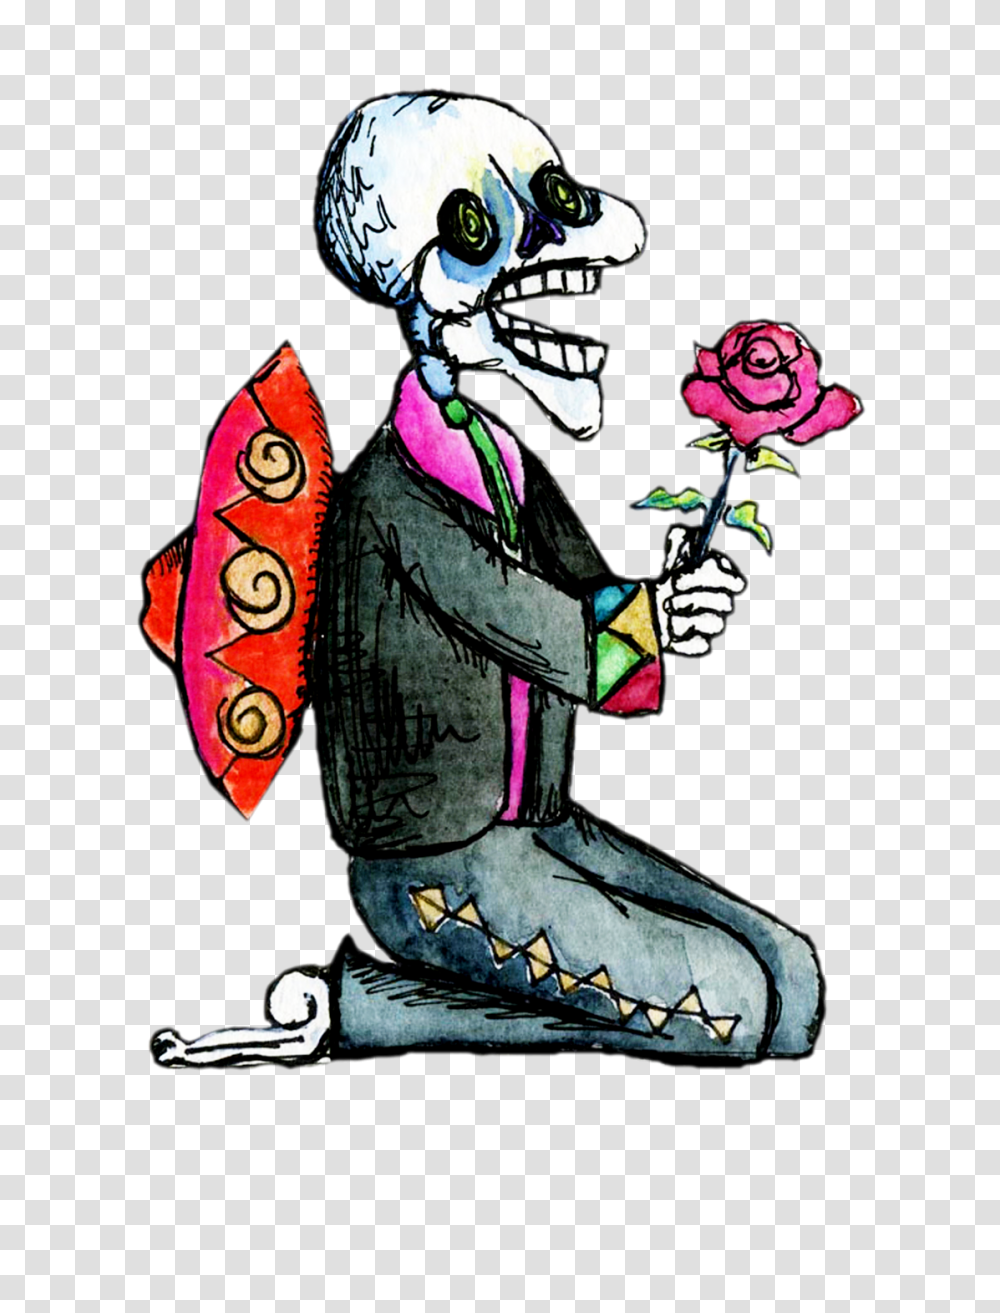 Mexico Day Of The Dead Dancer Mariachi Skeleton Hand Drawn Clip, Performer, Figurine Transparent Png